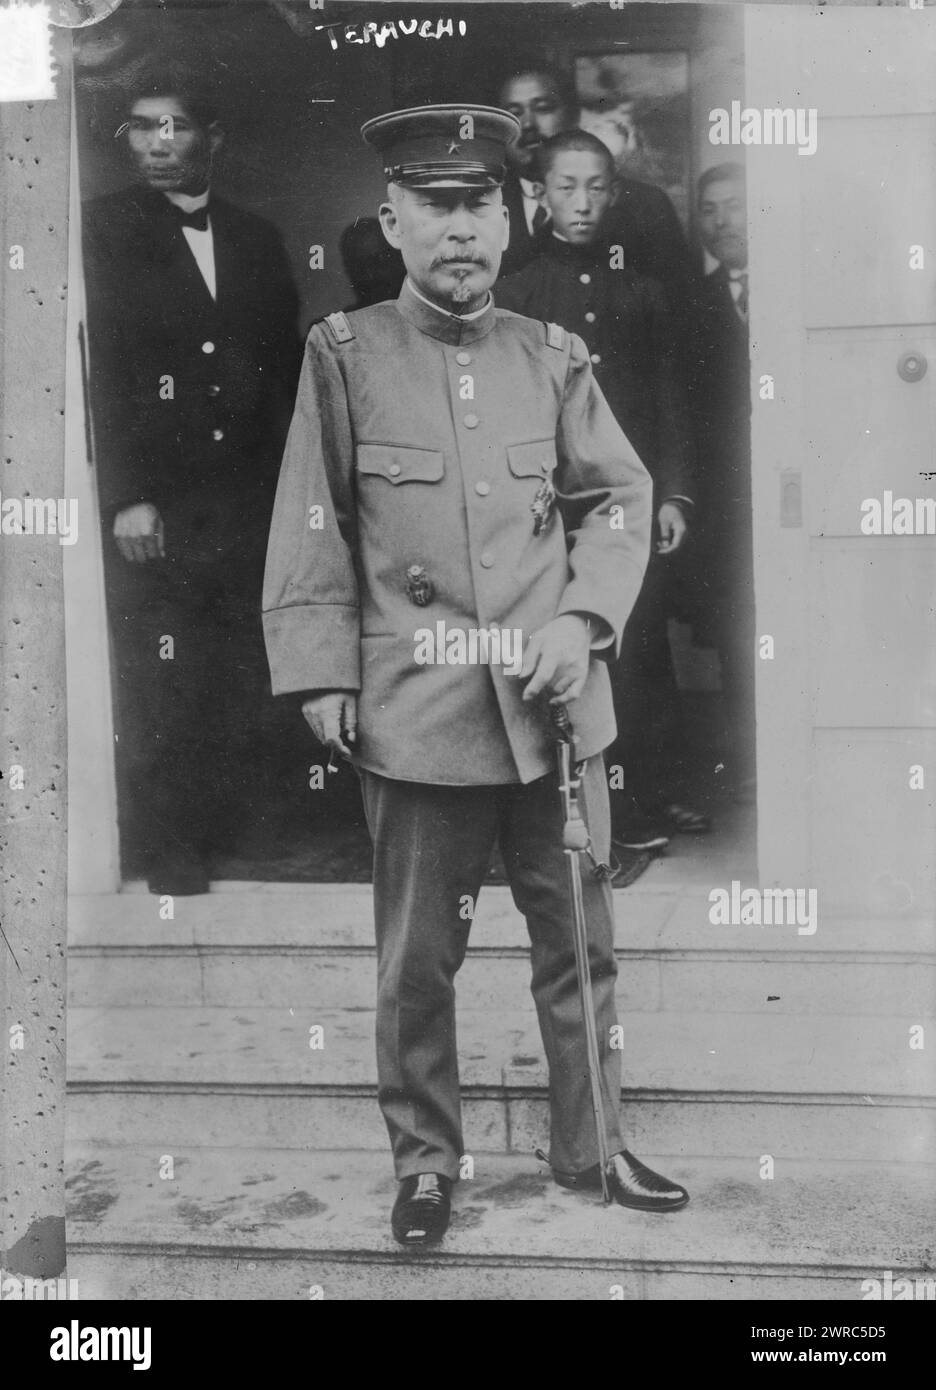 Gen. Count Terauchi, Photograph shows politician and officer Count Terauchi Masatake (1852-1919) who was a Gensui (Marshal) in the Imperial Japanese Army and served as Prime Minister (1916-1918)., between ca. 1915 and ca. 1920, Glass negatives, 1 negative: glass Stock Photo